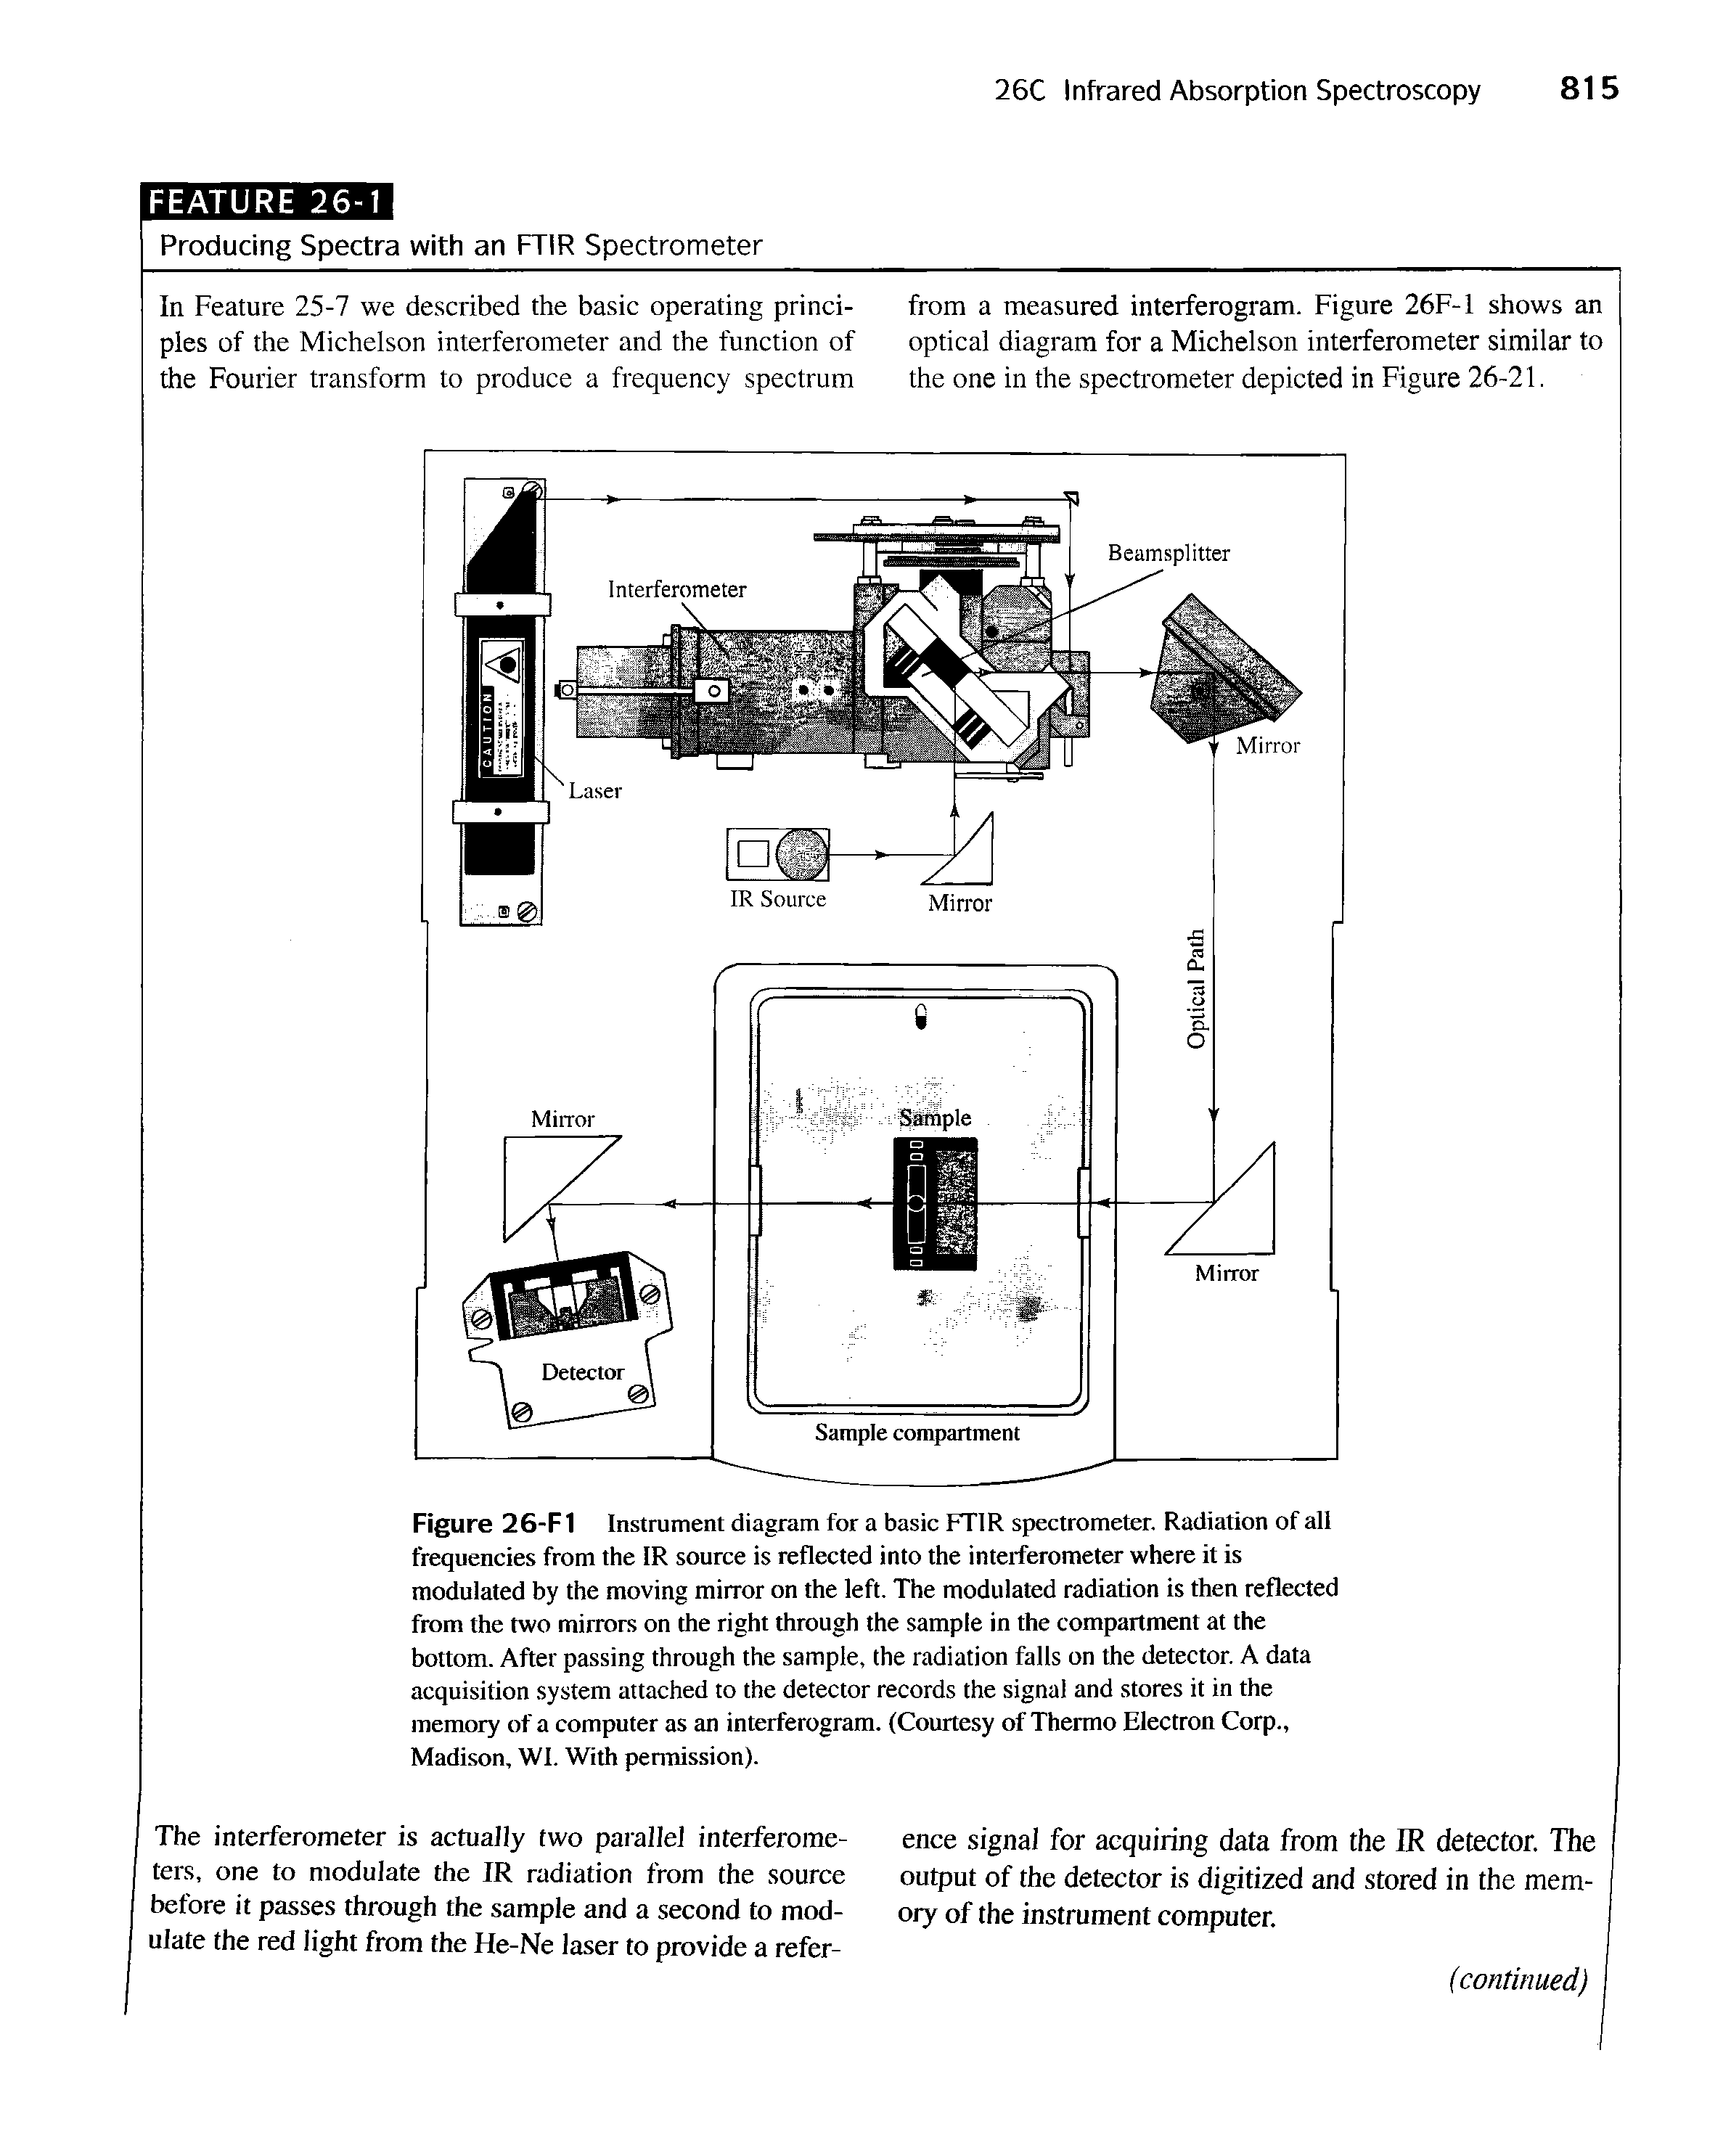 Figure 26-F1 Instrument diagram for a basic FTIR spectrometer. Radiation of all frequencies from the IR source is reflected into the interferometer where it is modulated by the moving mirror on the left. The modulated radiation is then reflected from the two mirrors on the right through the sample in the compartment at the bottom. After passing through the sample, the radiation falls on the detector. A data acquisition system attached to the detector records the signal and stores it in the memory of a computer as an interferogram. (Courtesy of Thermo Electron Corp., Madison, WI. With permission).